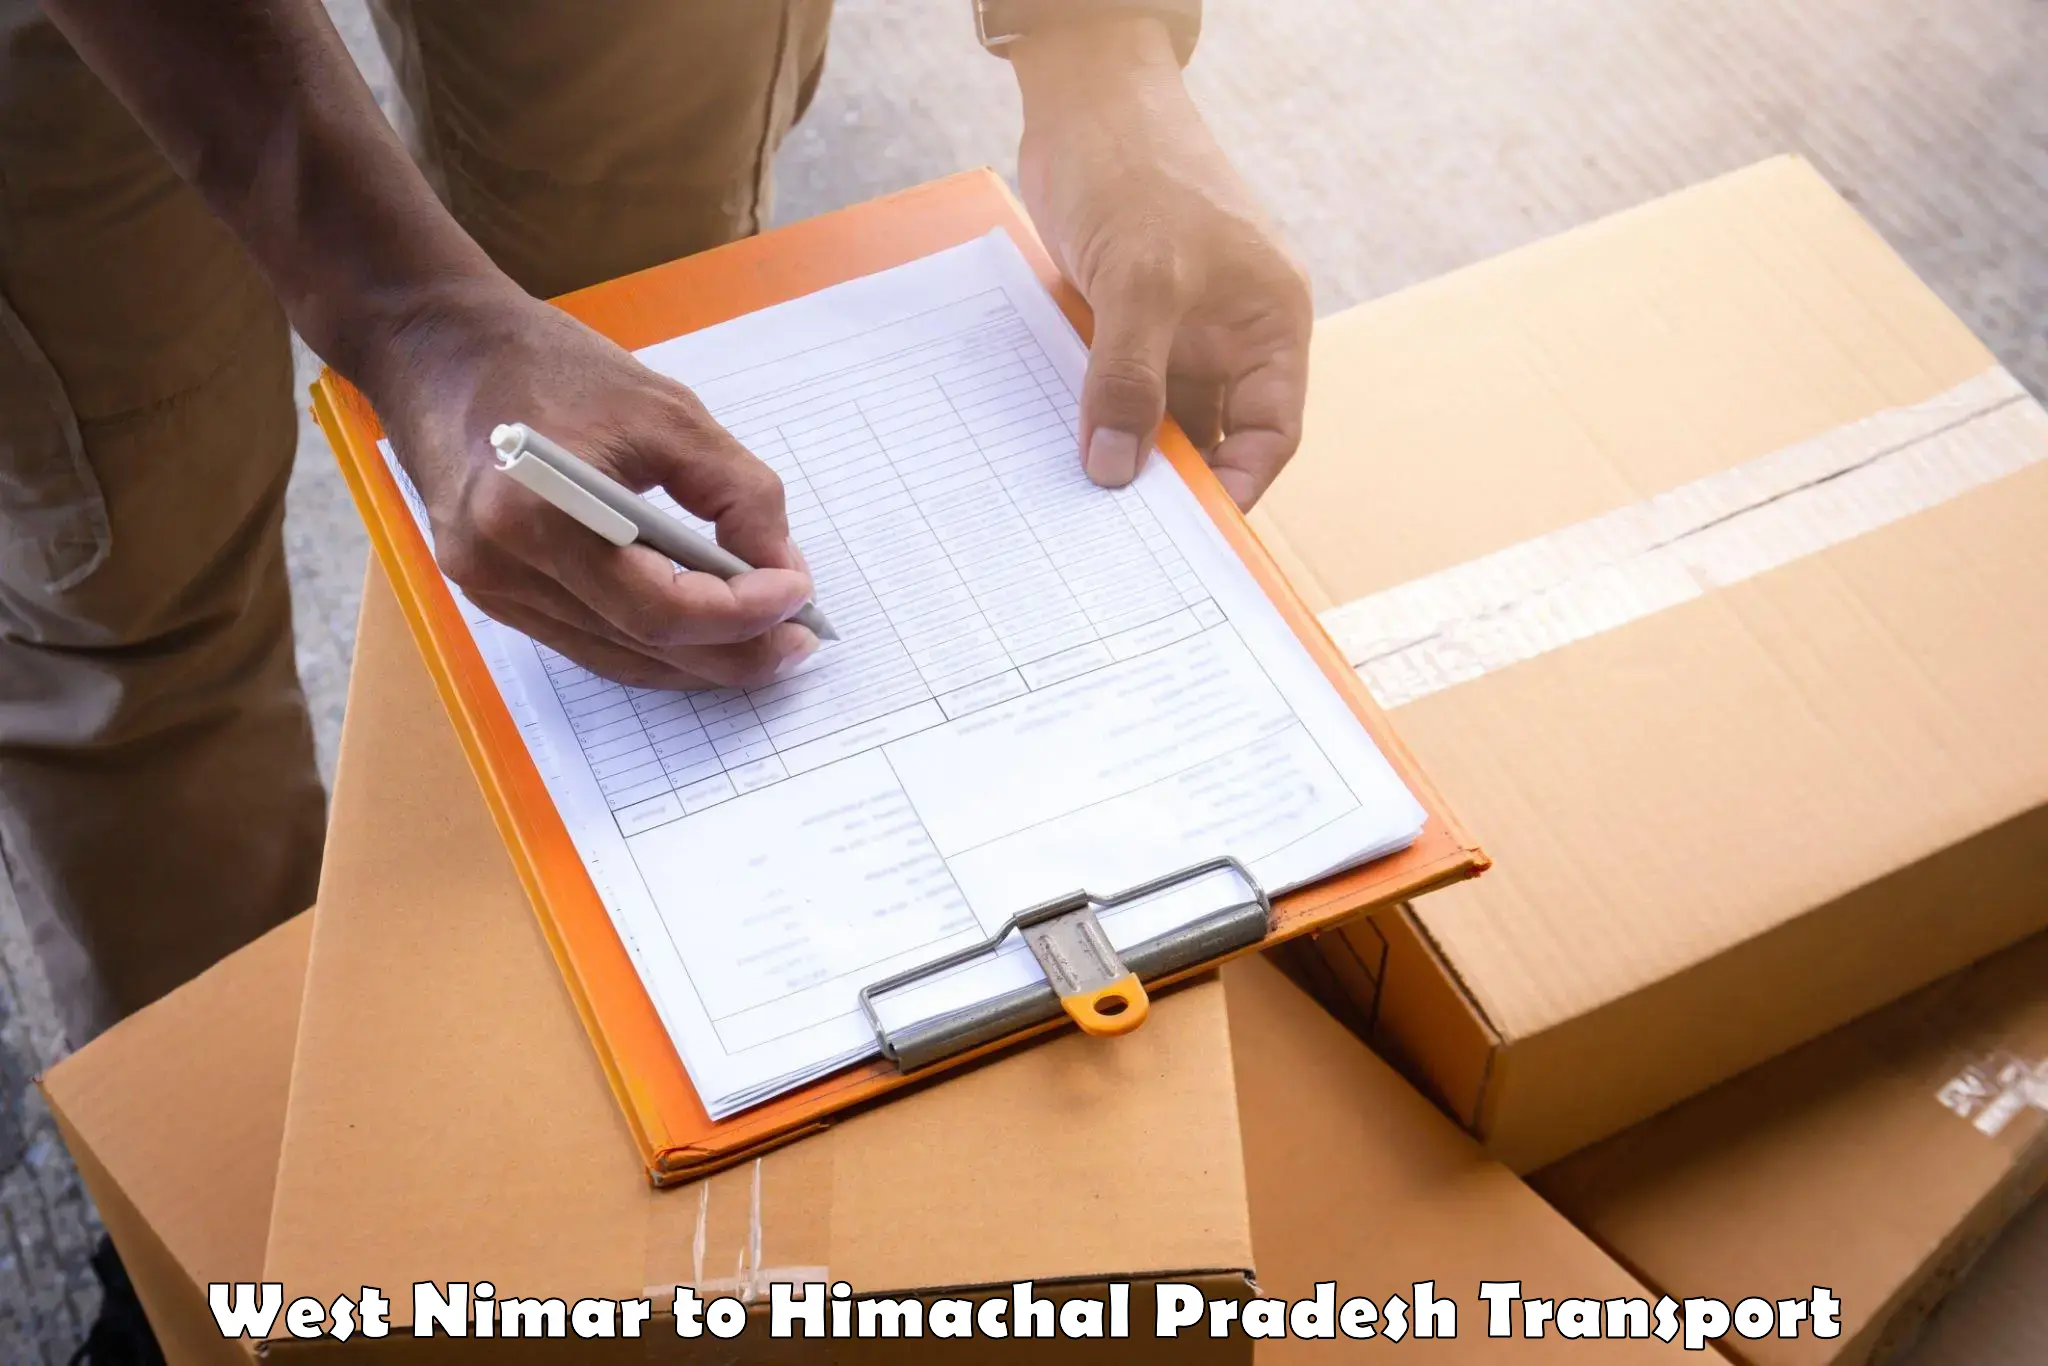 Domestic goods transportation services in West Nimar to Himachal Pradesh